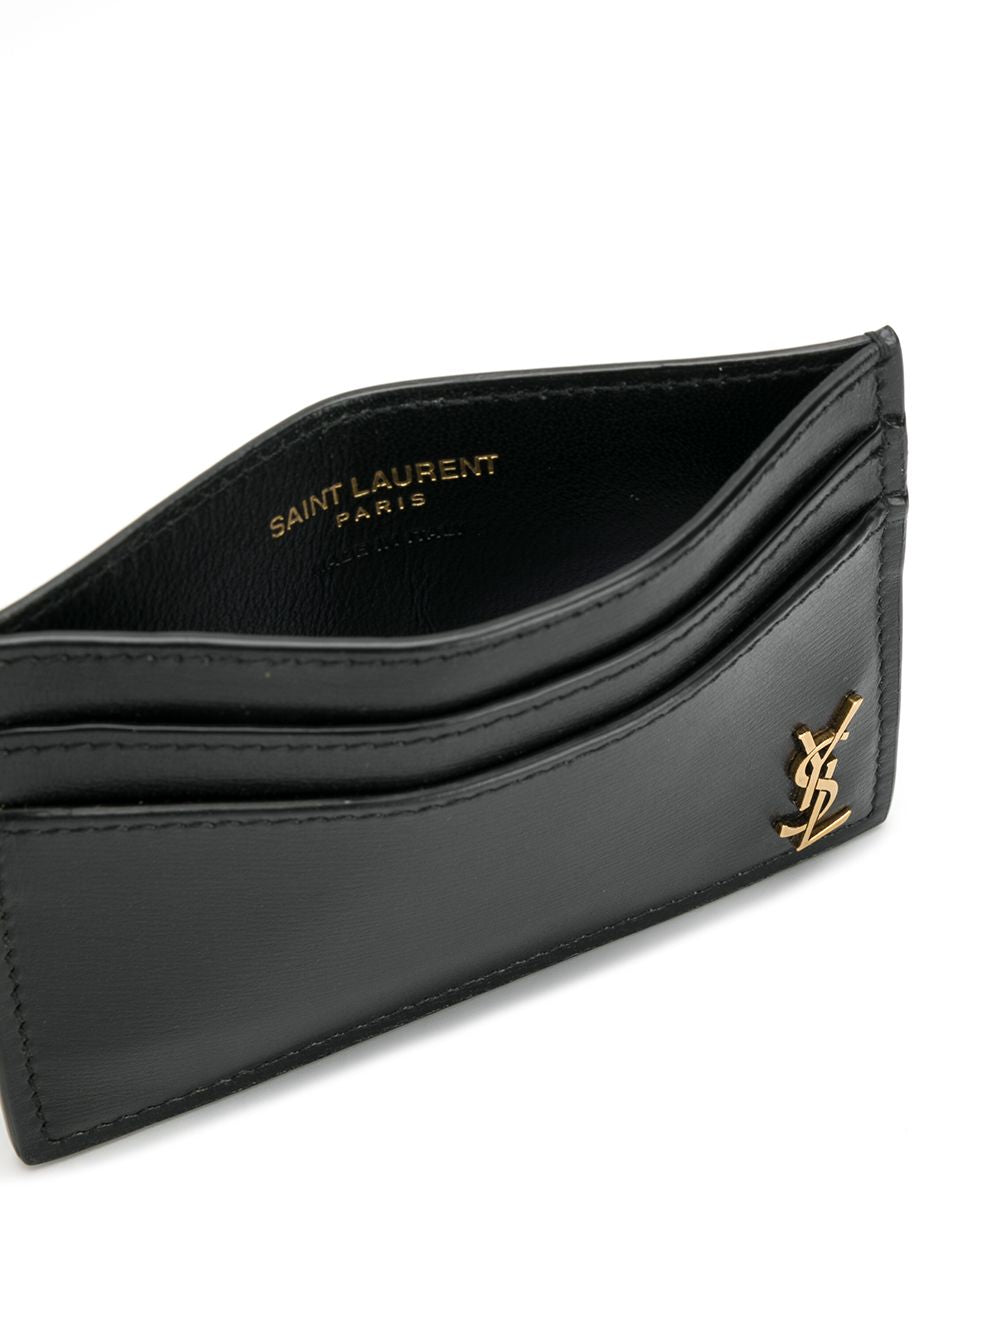 Crafted from smooth black leather